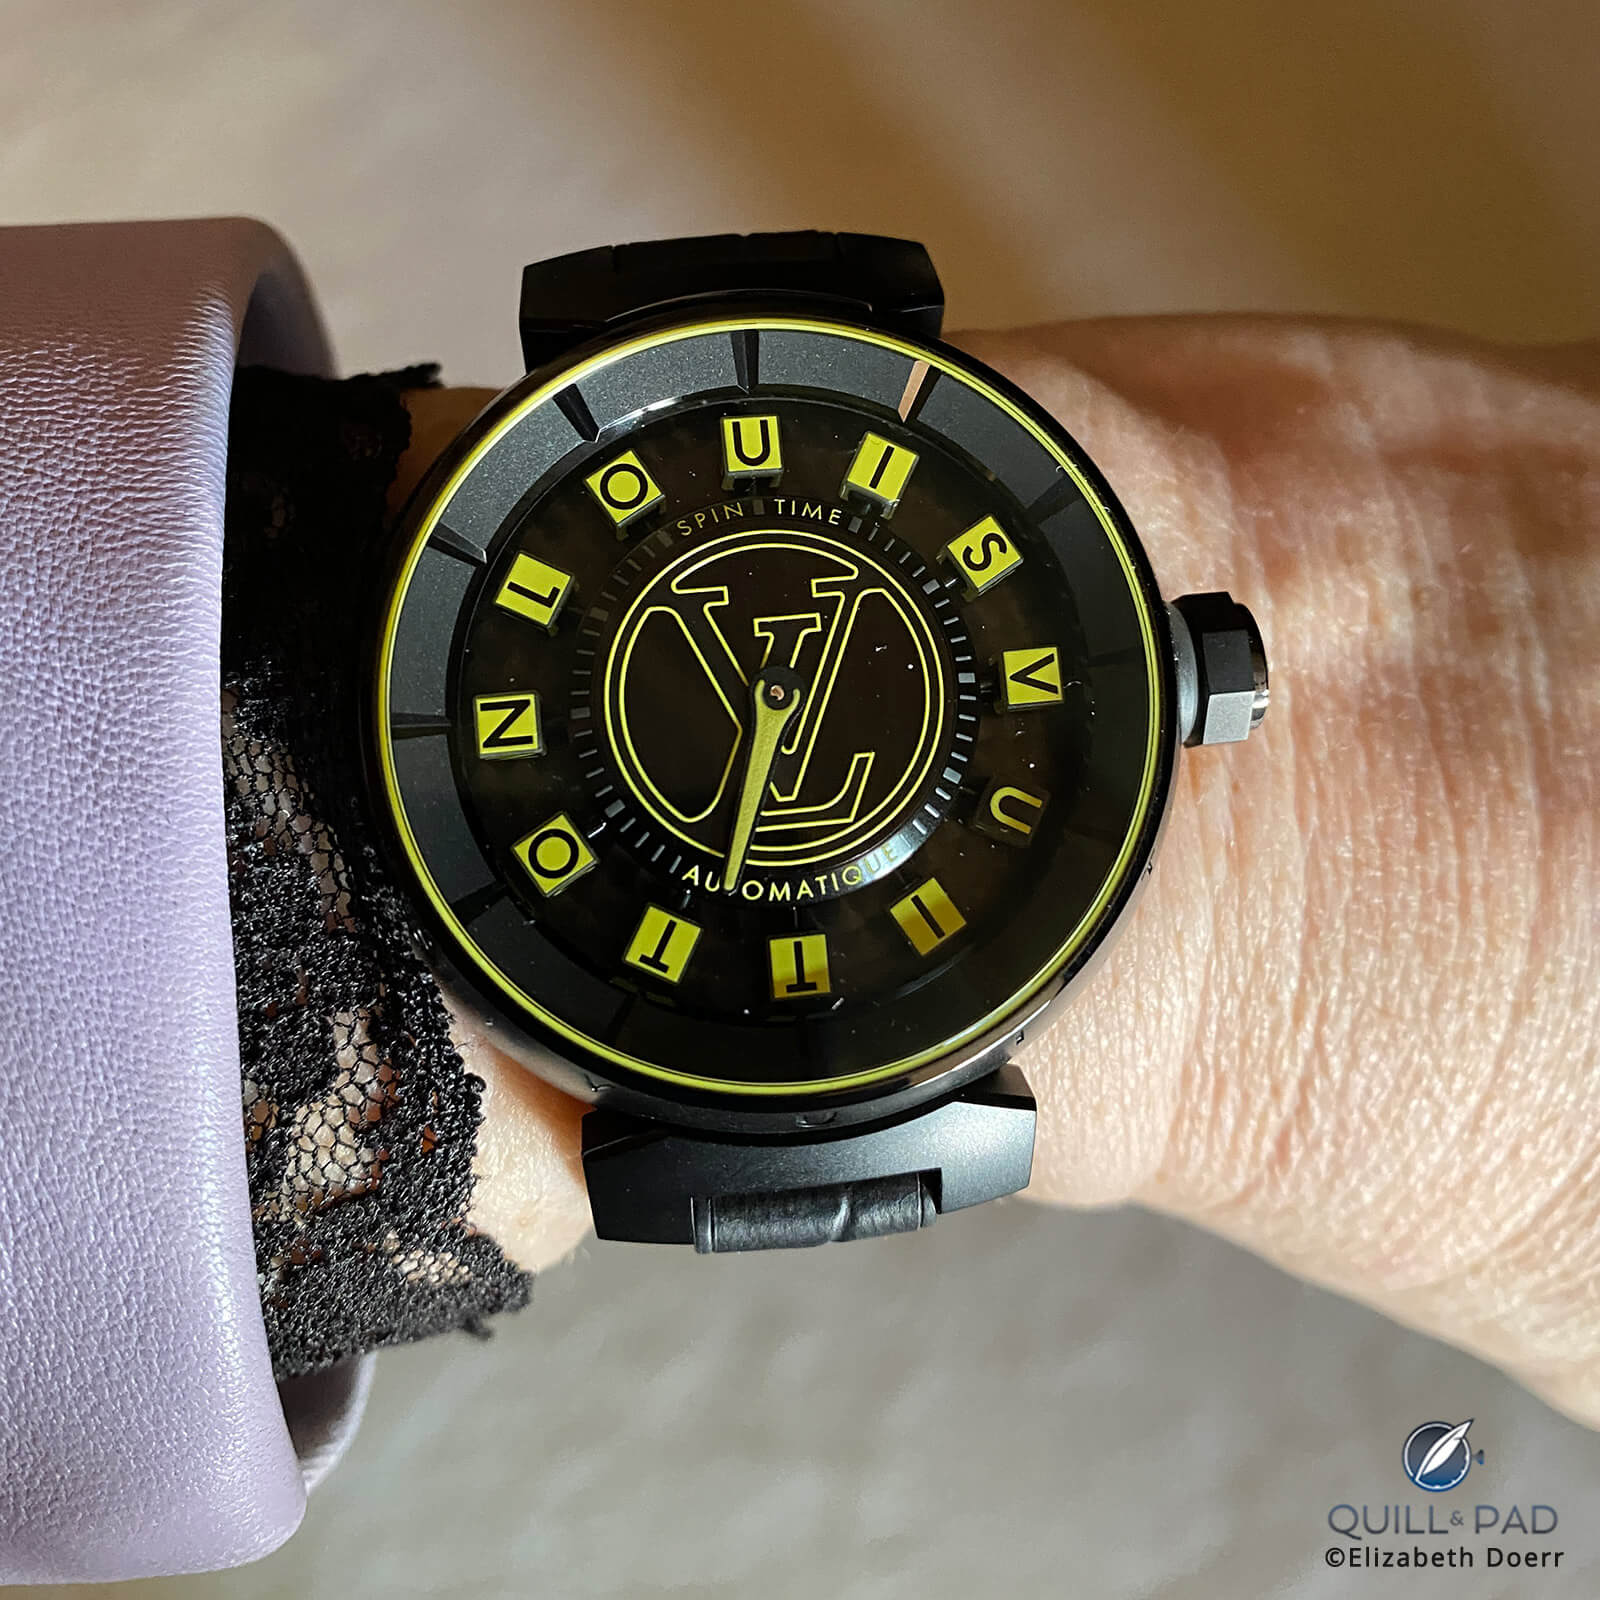 Louis Vuitton Tambour Spin Time Air Quantum - Hands-On, Price